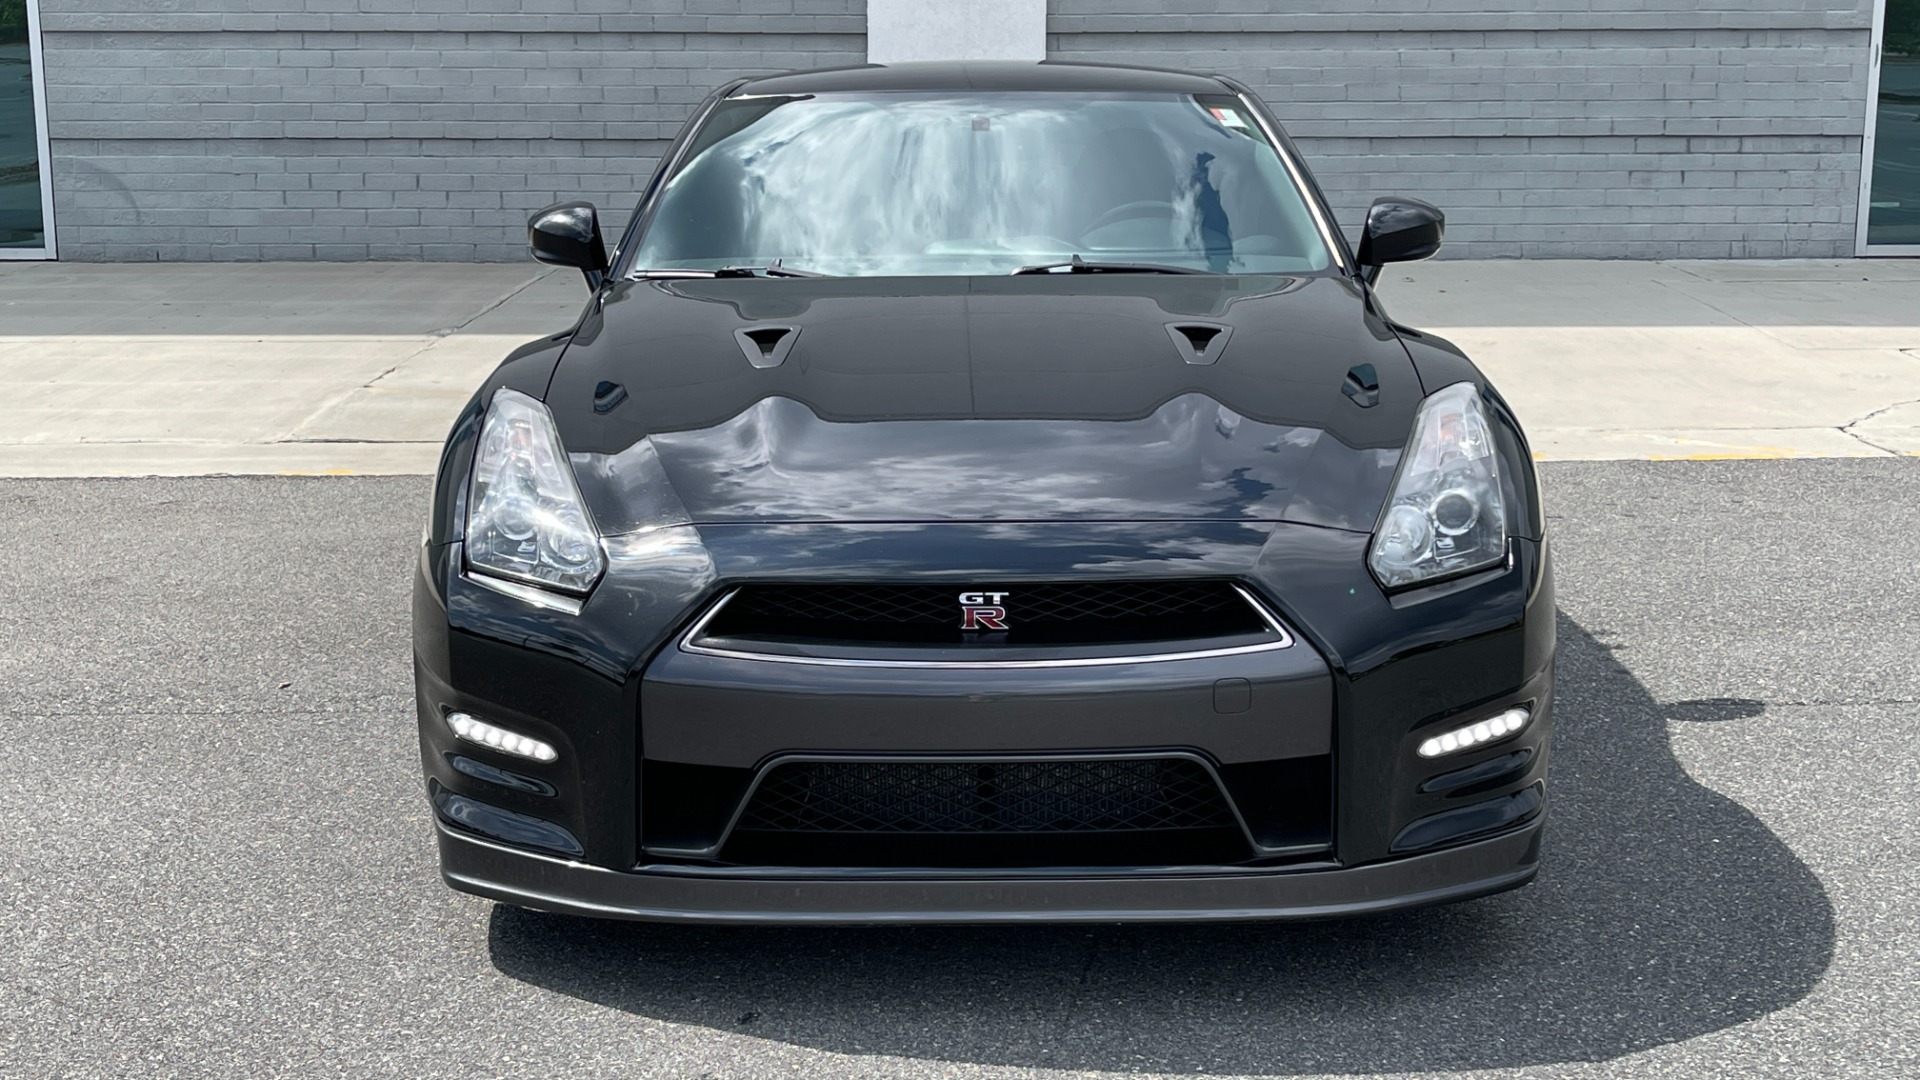 Used 2013 Nissan GT-R PREMIUM COUPE / 3.8L TWIN-TURBO / 6-SPD AUTO / COLD WTHR PKG / CAMERA for sale $75,995 at Formula Imports in Charlotte NC 28227 11